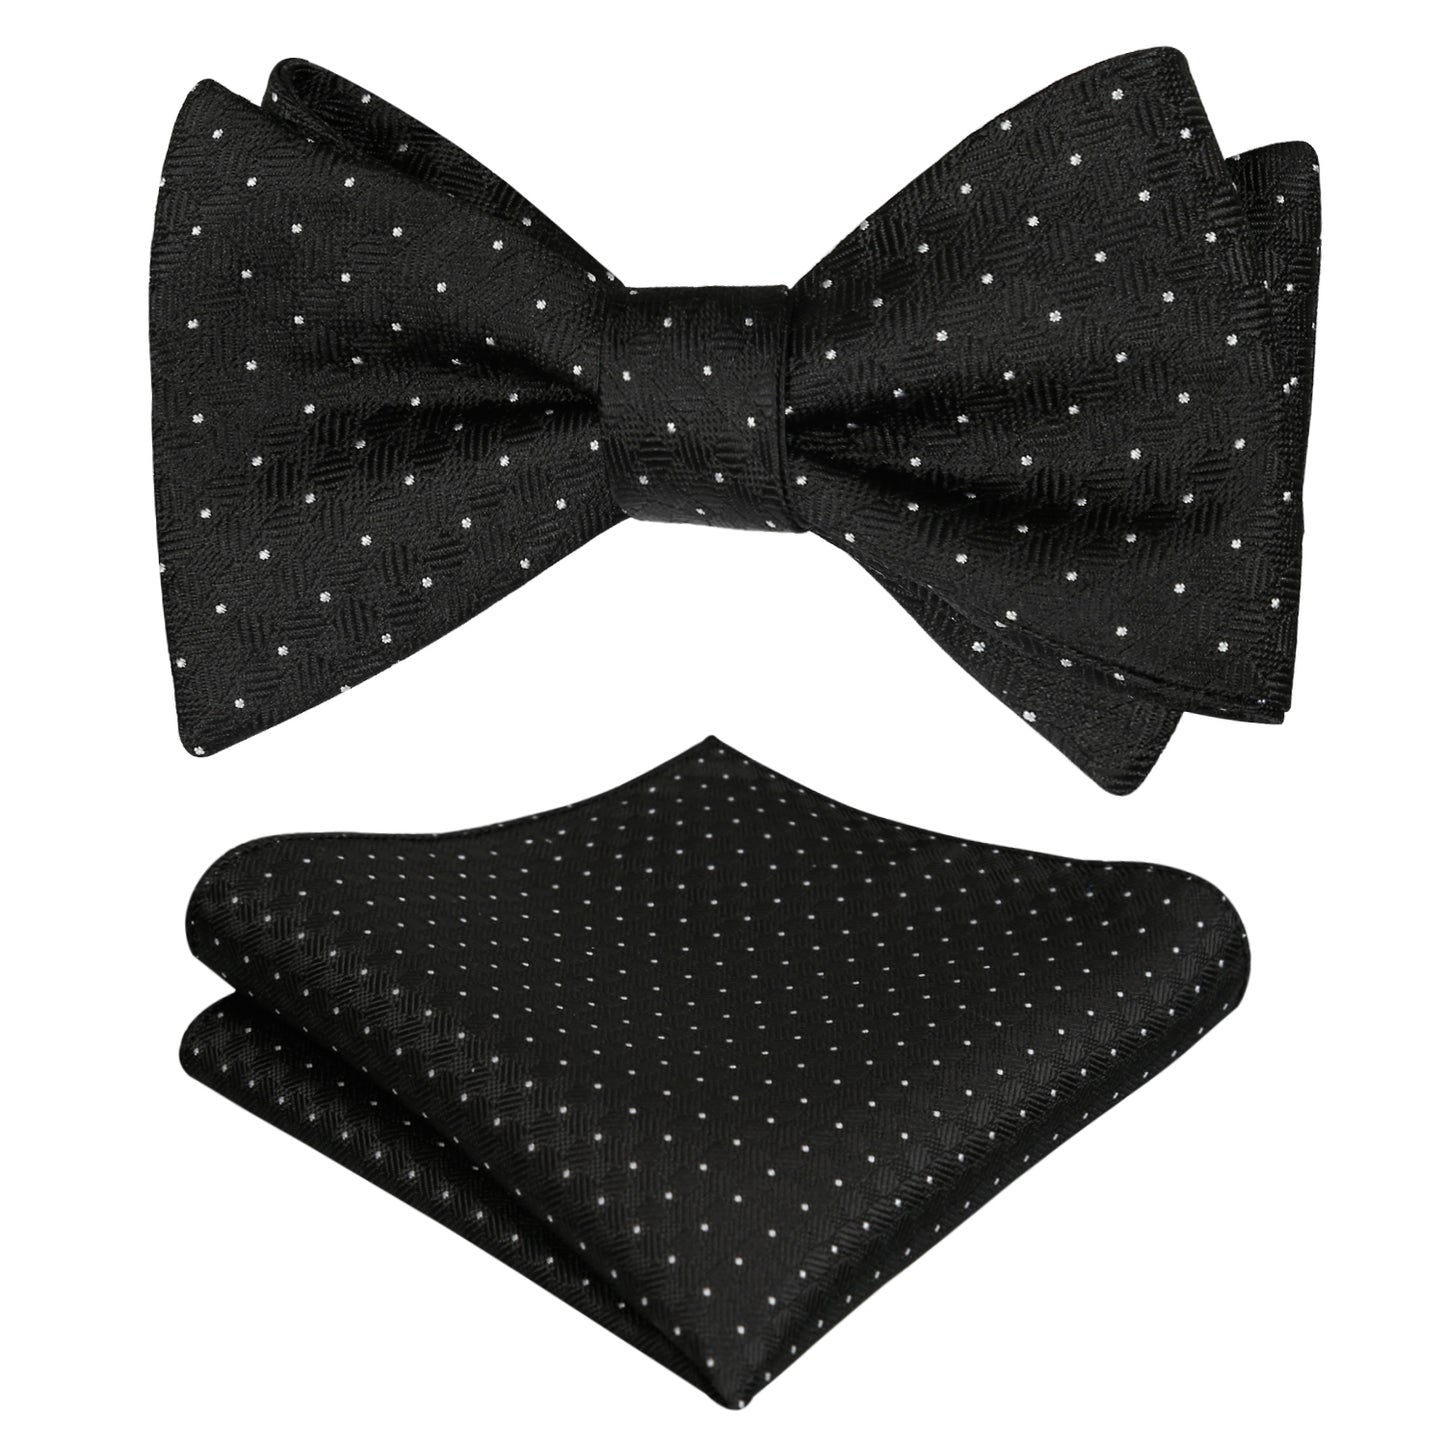 Men's Polka Dots Self-tied Bow Tie and Pocket Square Set #058